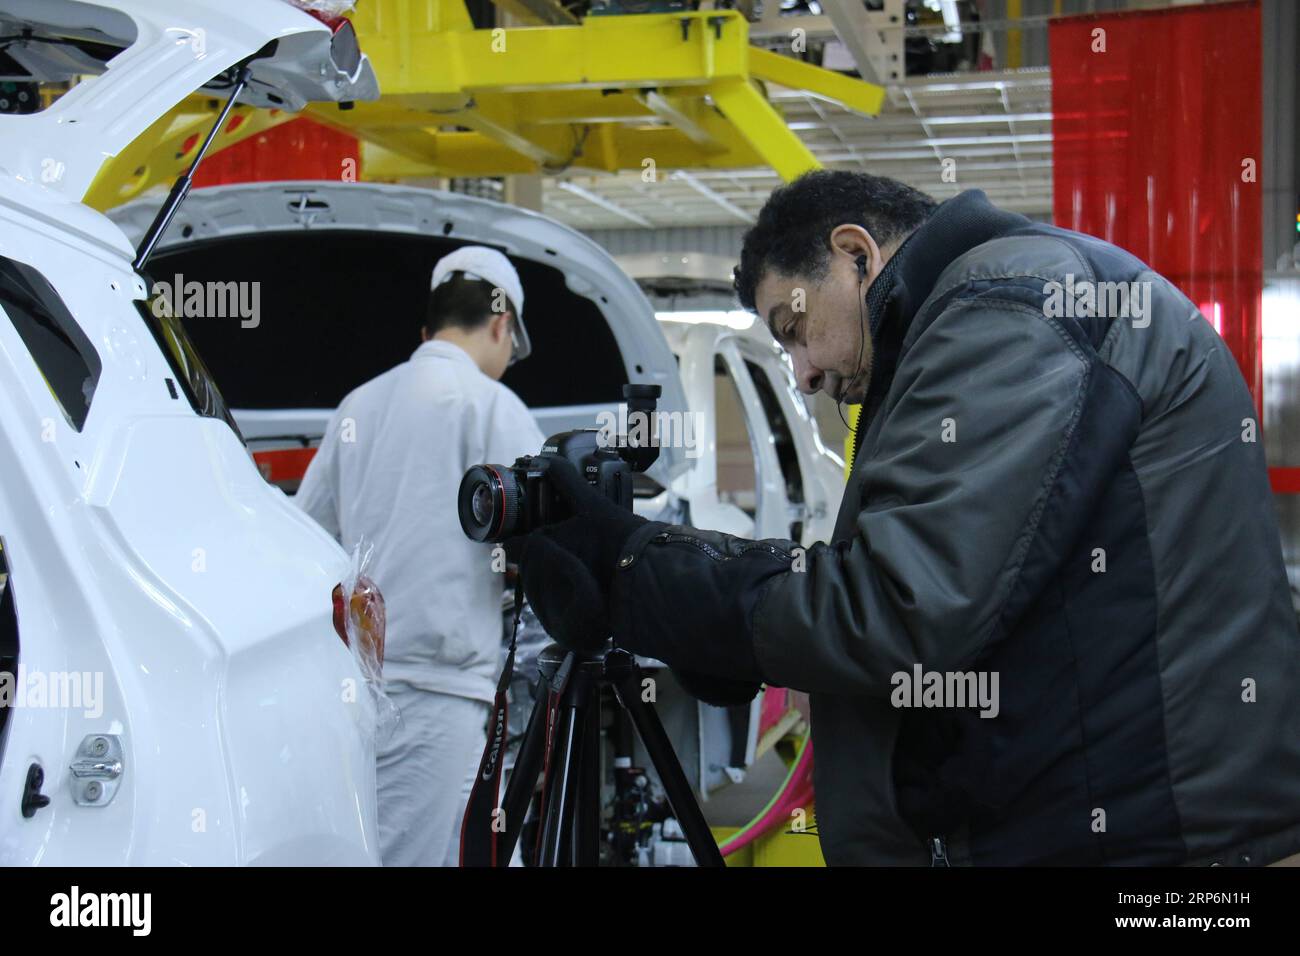 (190117) -- URUMQI, Jan. 17, 2019 () -- Sherif Sonbol Tadros Sonbol, vice editor-in-chief of Egypt s Al-Ahram Weekly , shoots at the factory of the Guangzhou Automobile Group Co., ltd. (GAC Group) in Urumqi, capital of northwest China s Xinjiang Uygur Autonomous Region, Jan. 10, 2019. A media group consisting of people from six countries praised the development and stability of Xinjiang after visiting the region. The Silk Road Celebrity China Tour was held from Jan. 9 to 16 in Xinjiang, with 12 media representatives from Egypt, Turkey, Pakistan, Afghanistan, Bangladesh and Sri Lanka visiting l Stock Photo